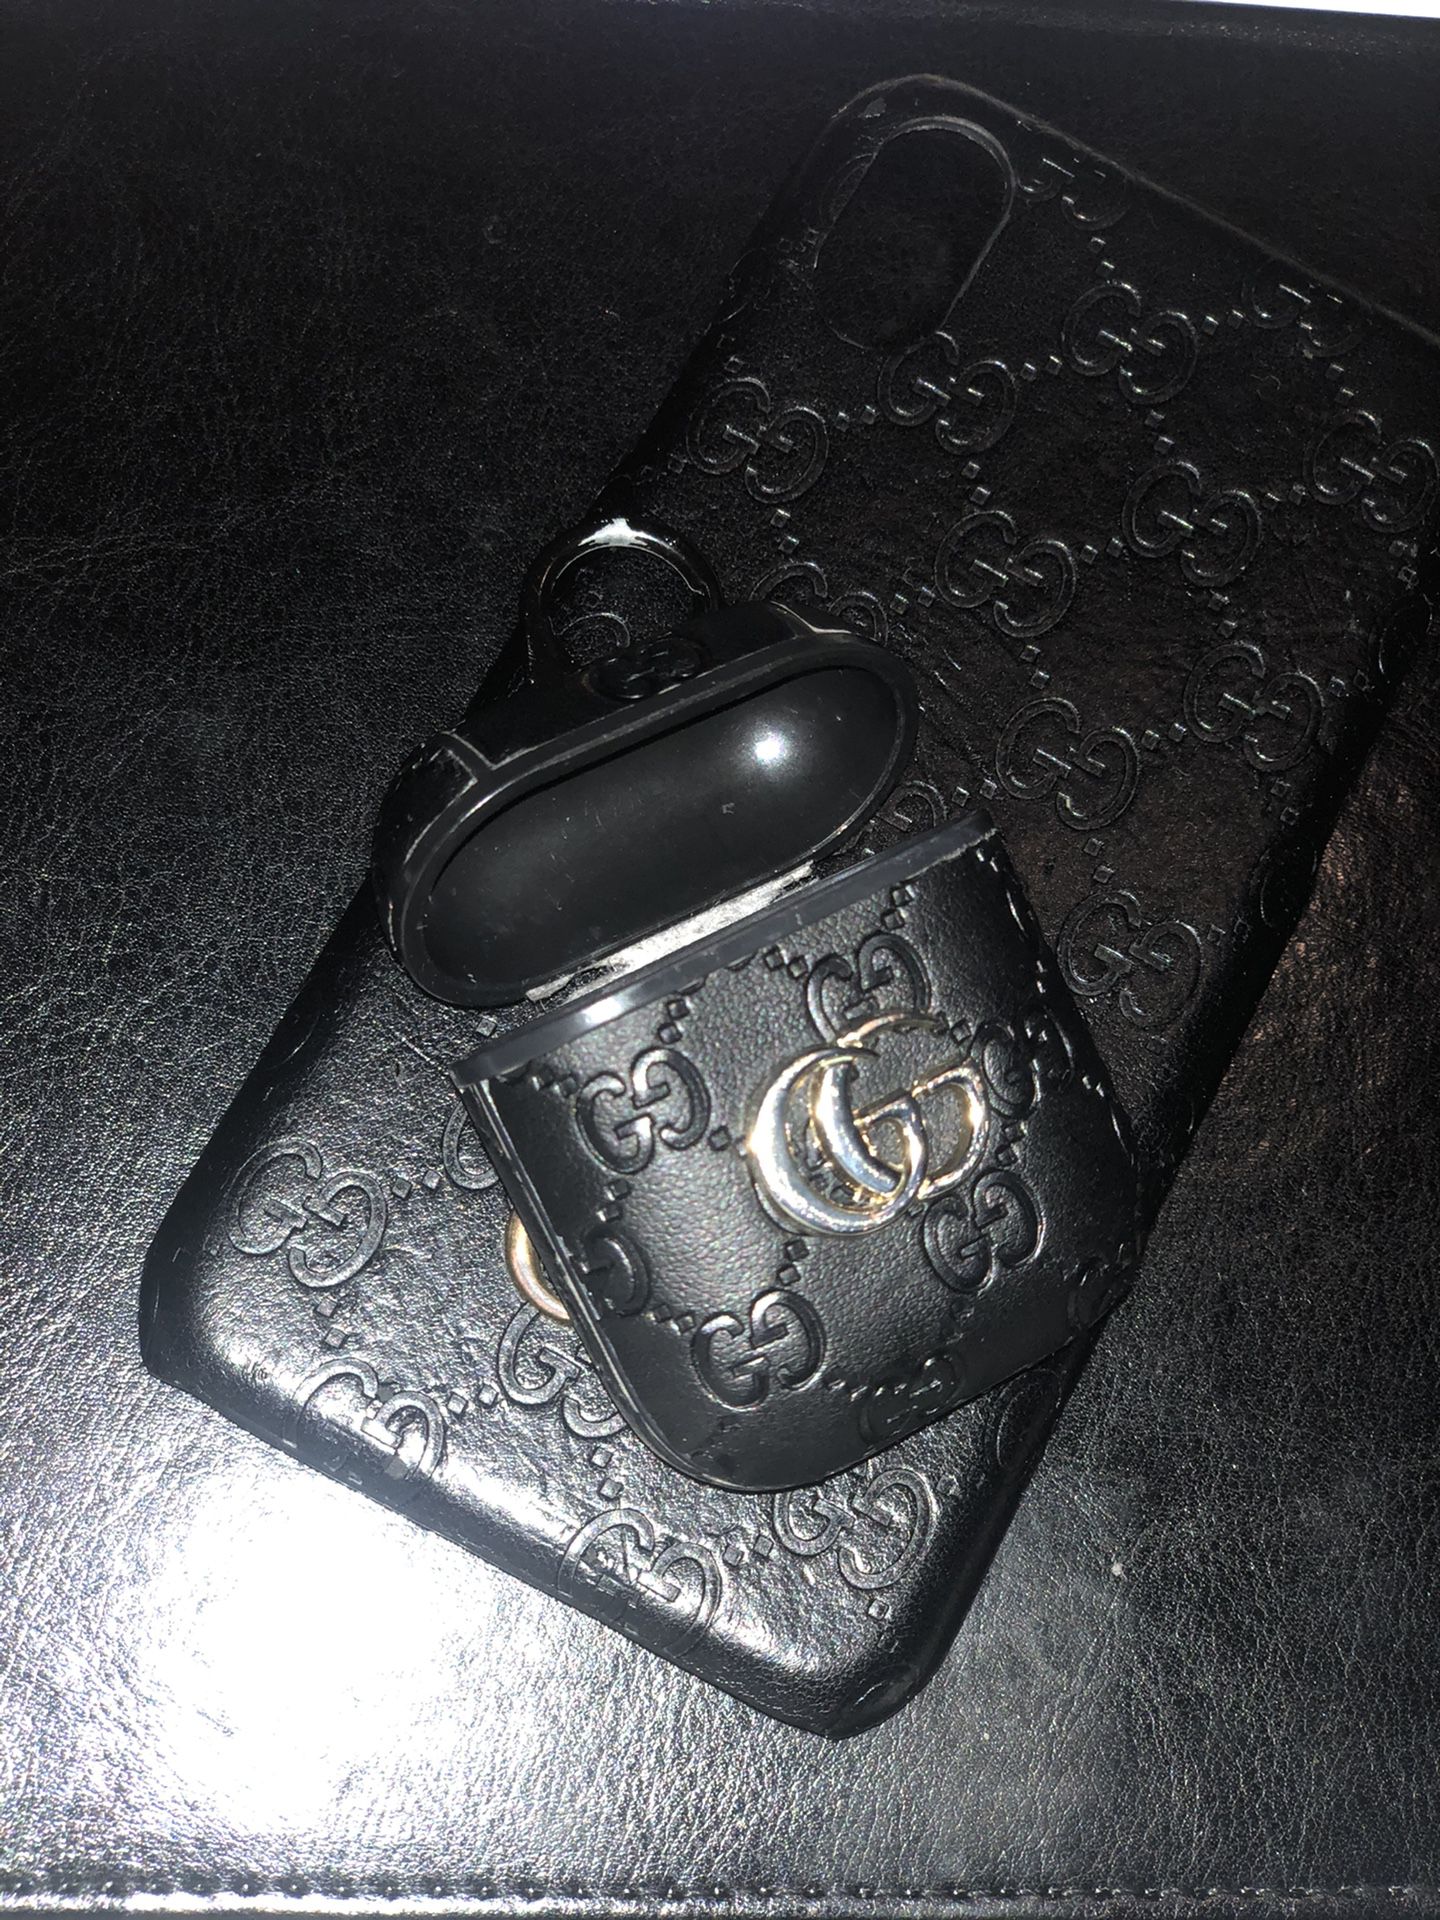 Gucci iPhone X and AirPod case